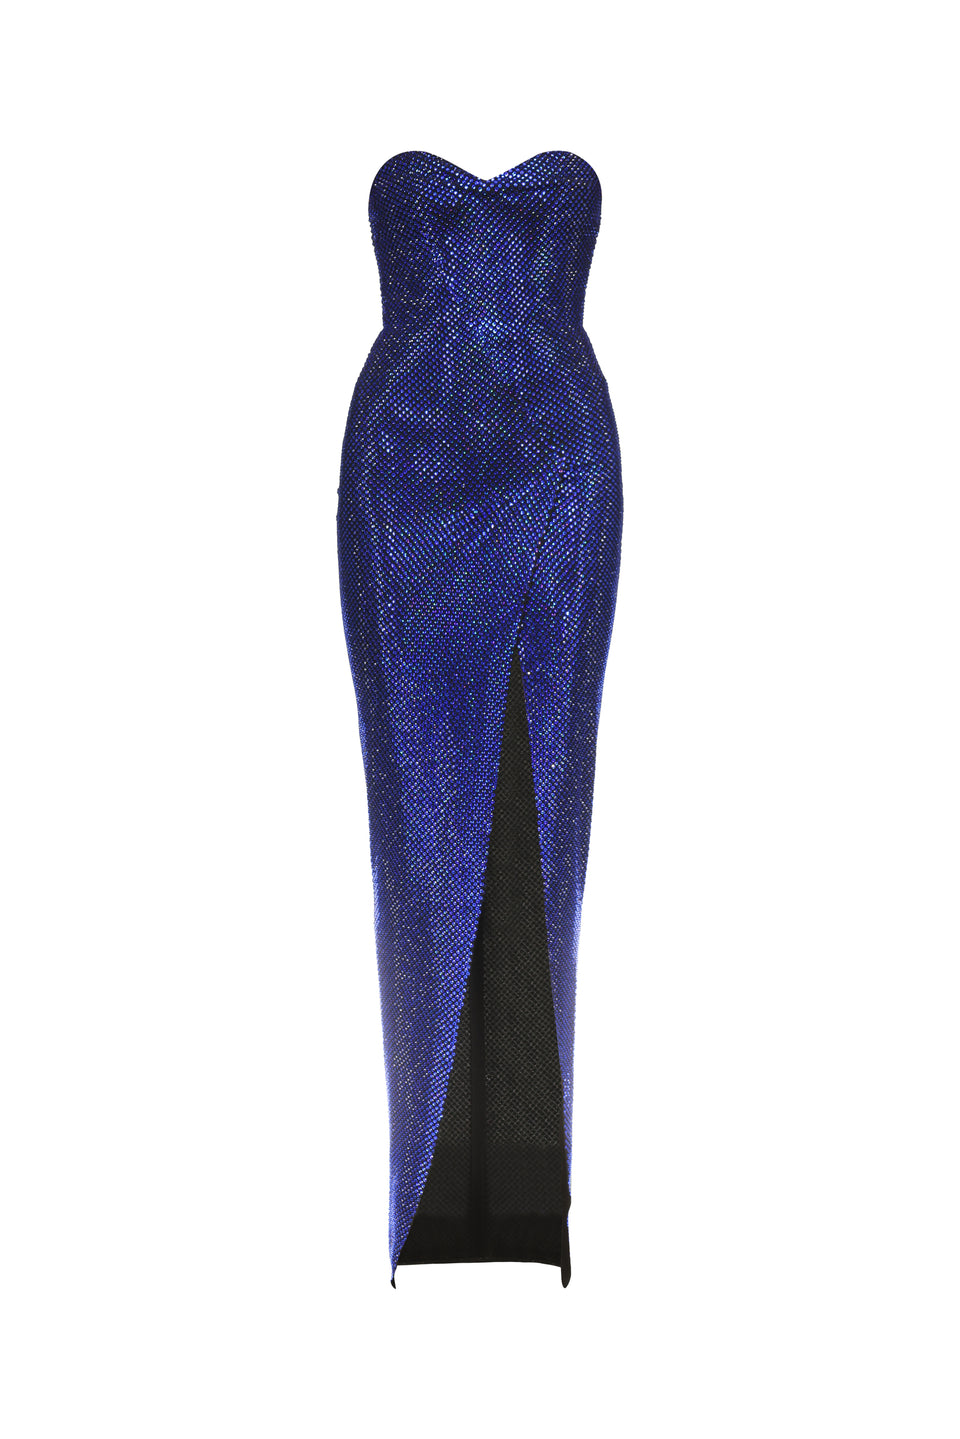 CRYSTALLIZED BUSTIER LONG DRESS - Image 1